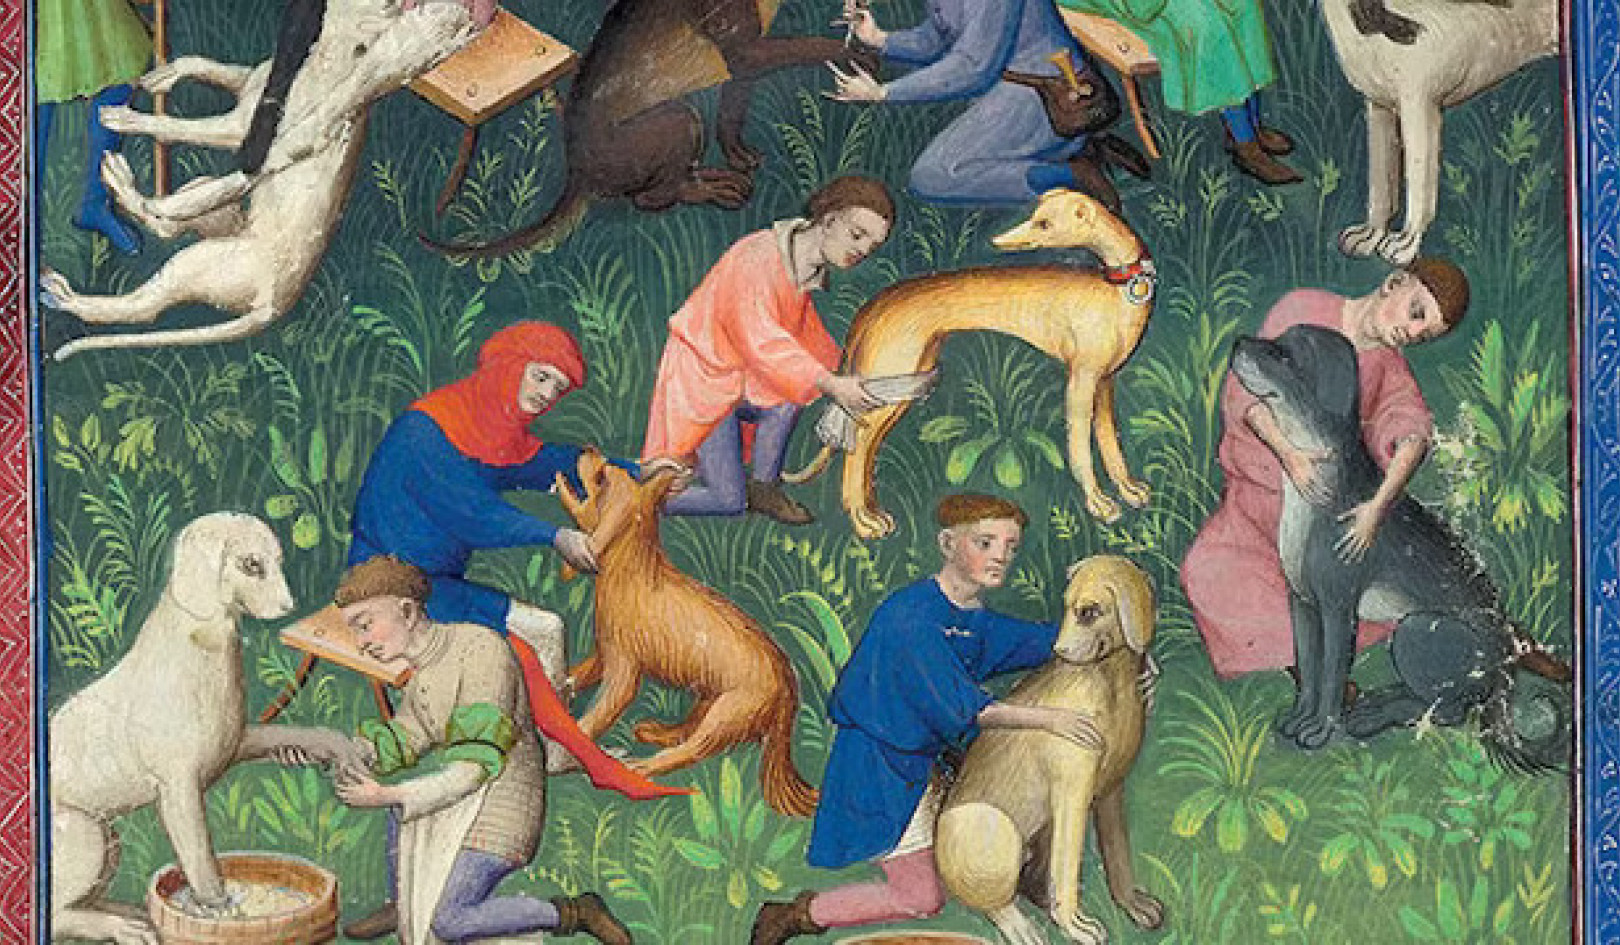 Dogs of Yore: A Glimpse into Medieval Dog Ownership